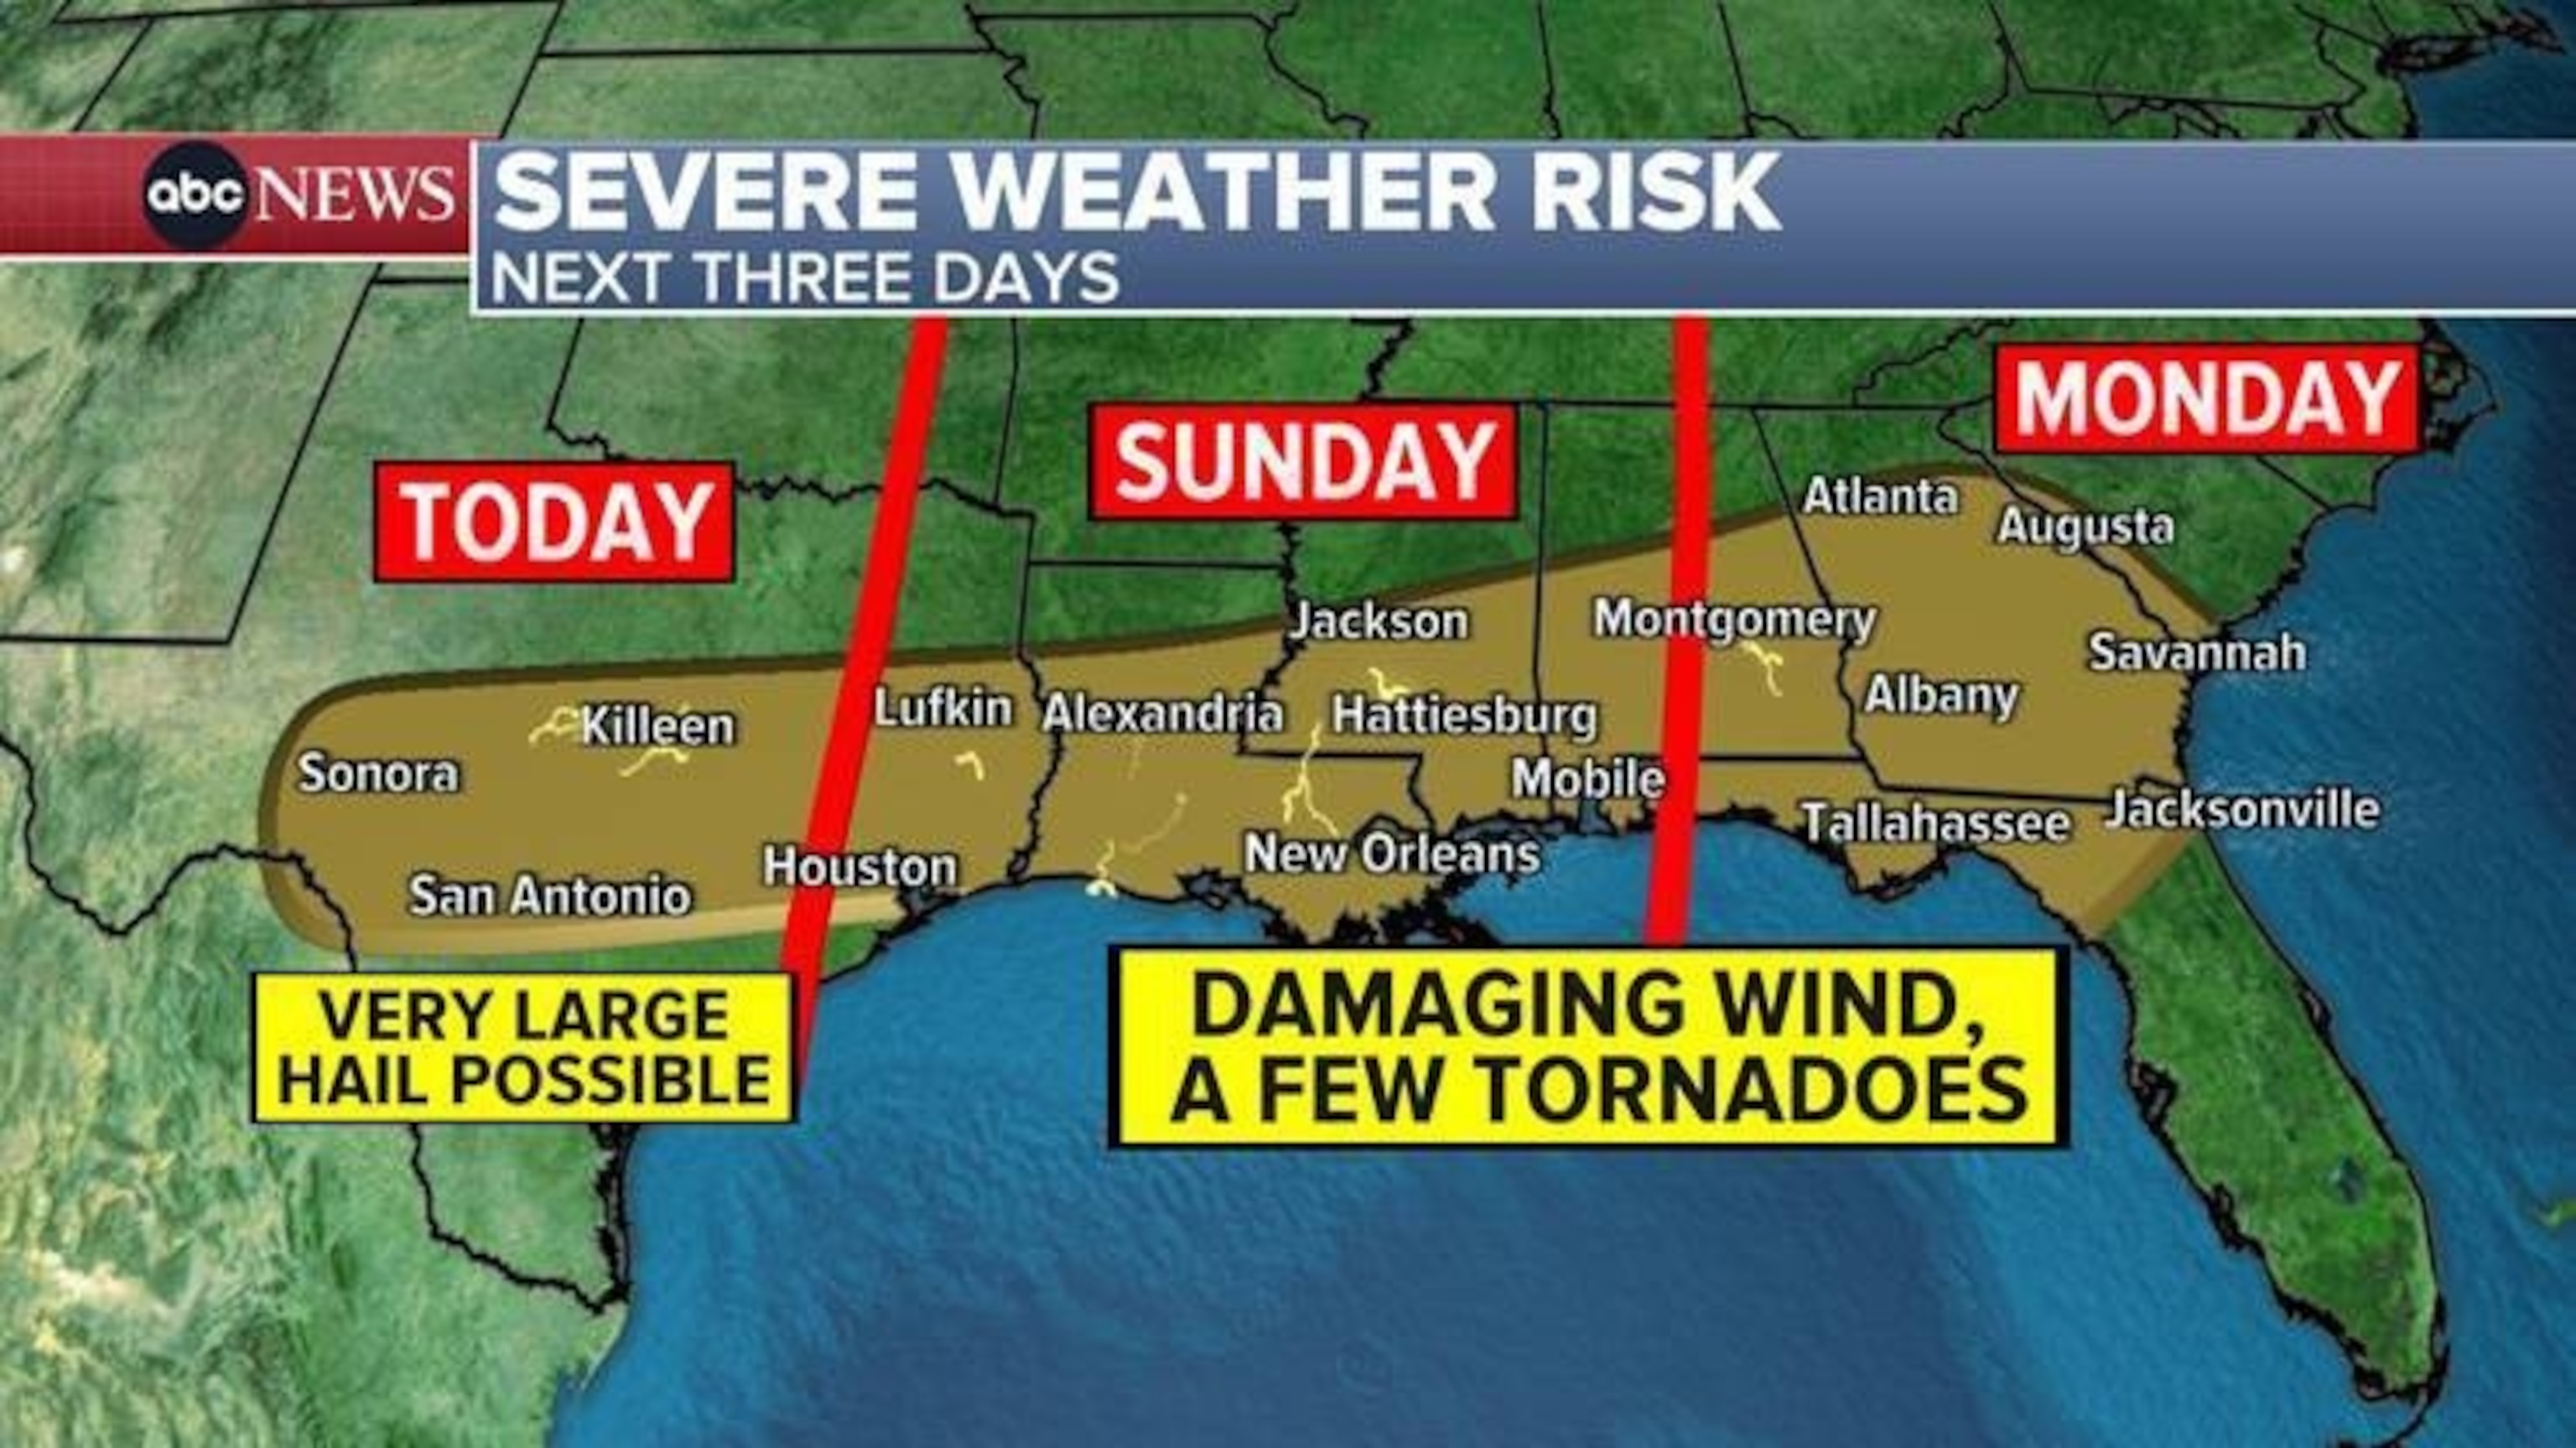 PHOTO: severe weather risk map graphic